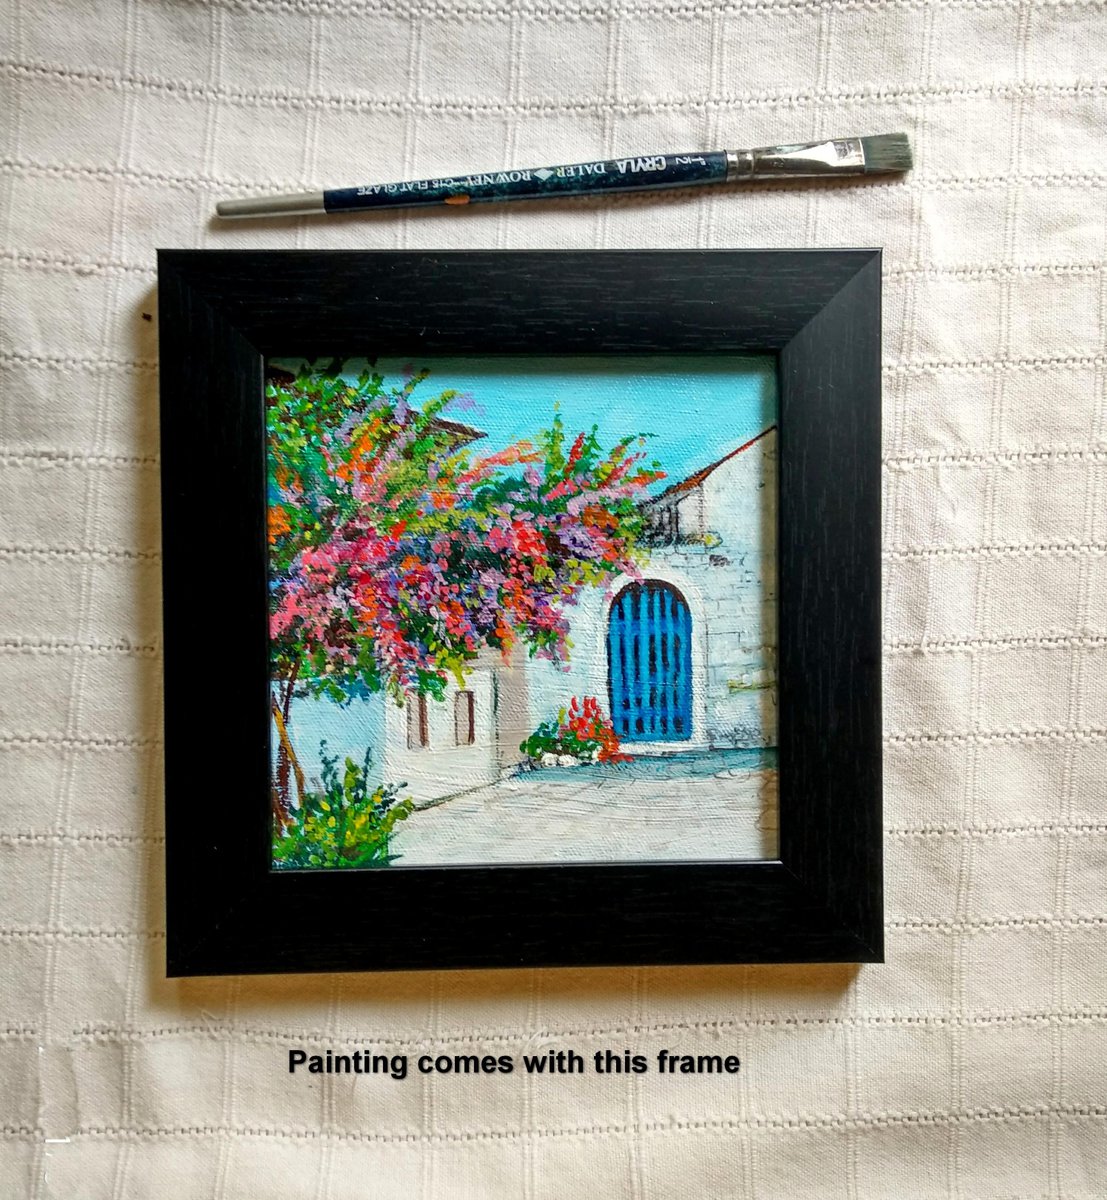 Greek Summer House with bougainvillea Miniature Santorini Painting 6x 6 by Asha Shenoy